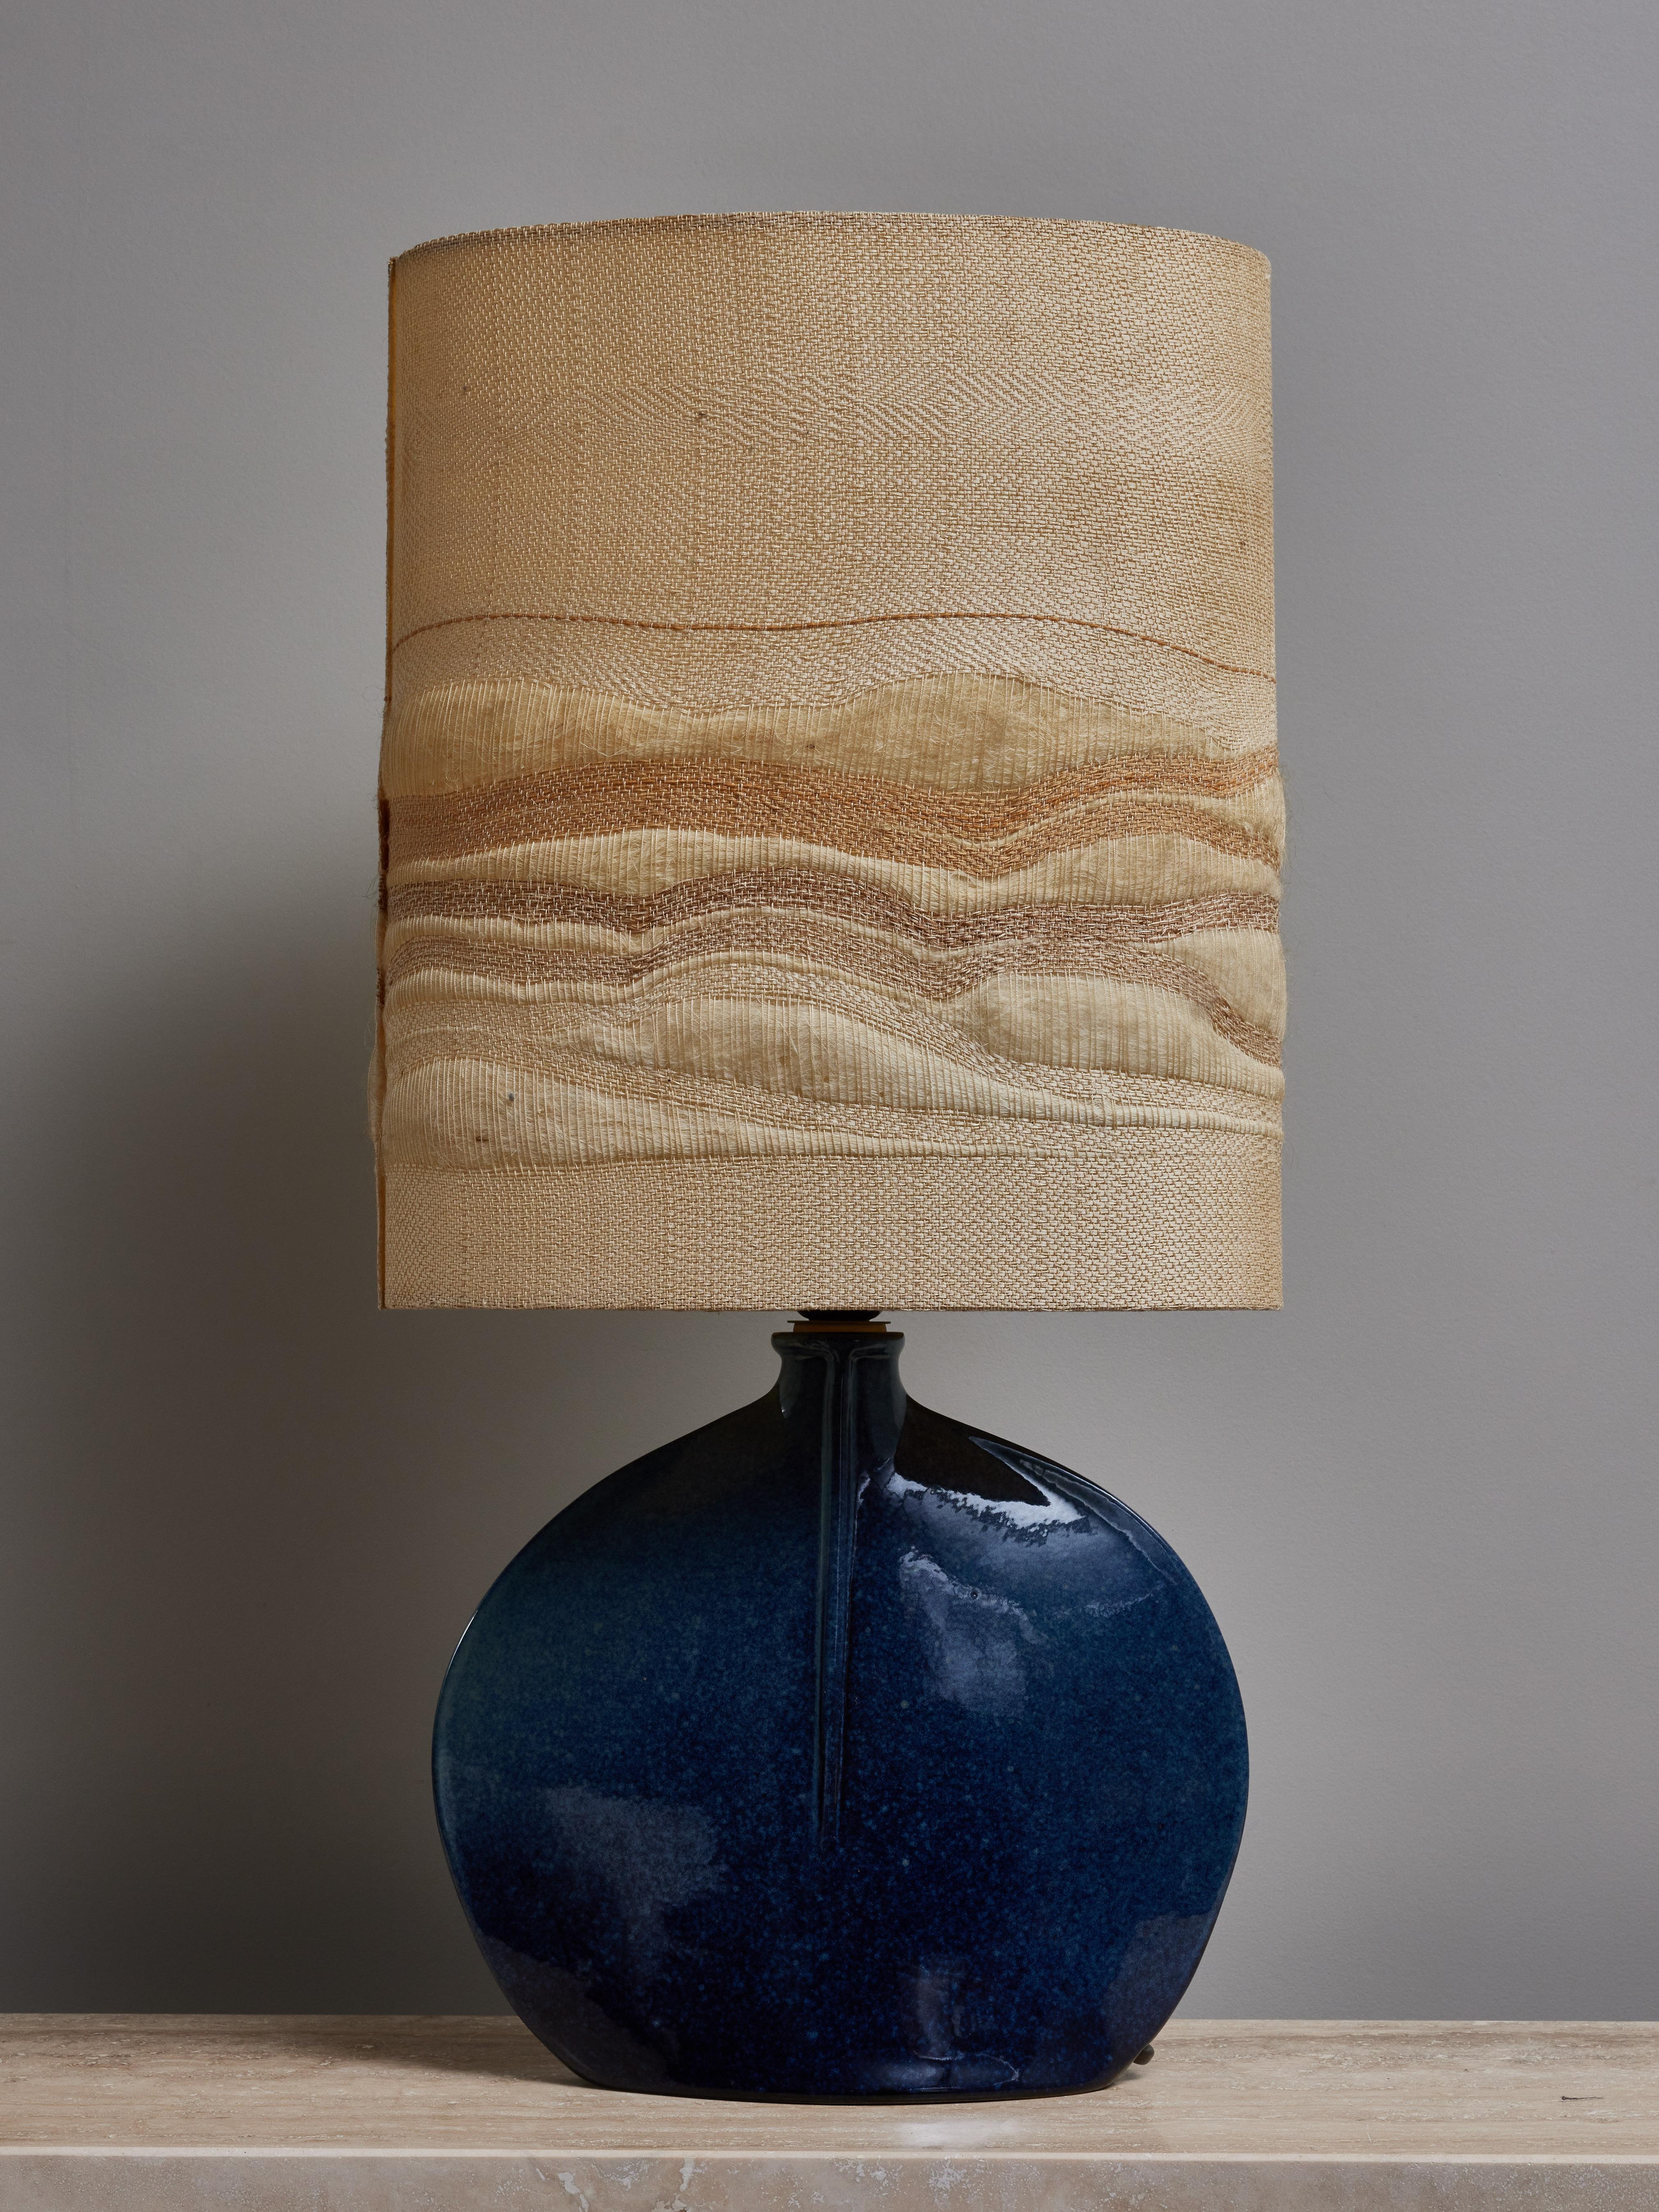 Elegant small table lamp in glazed ceramic, topped with the original woven shade.